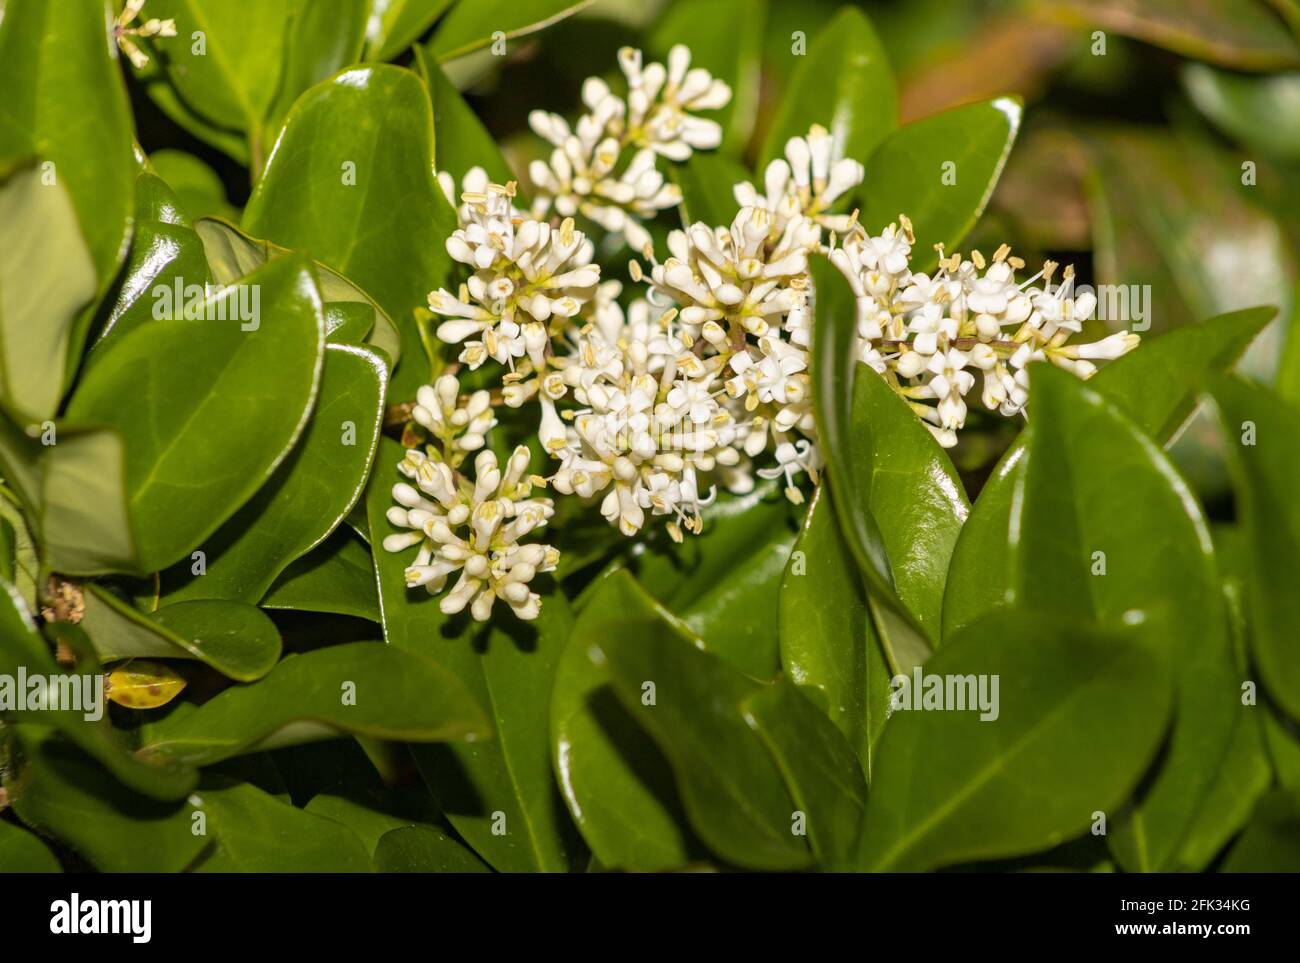 Daphne is a genus of between 70 and 95 species of deciduous and evergreen shrubs in the family Thymelaeaceae, which are grown in a garden. Stock Photo